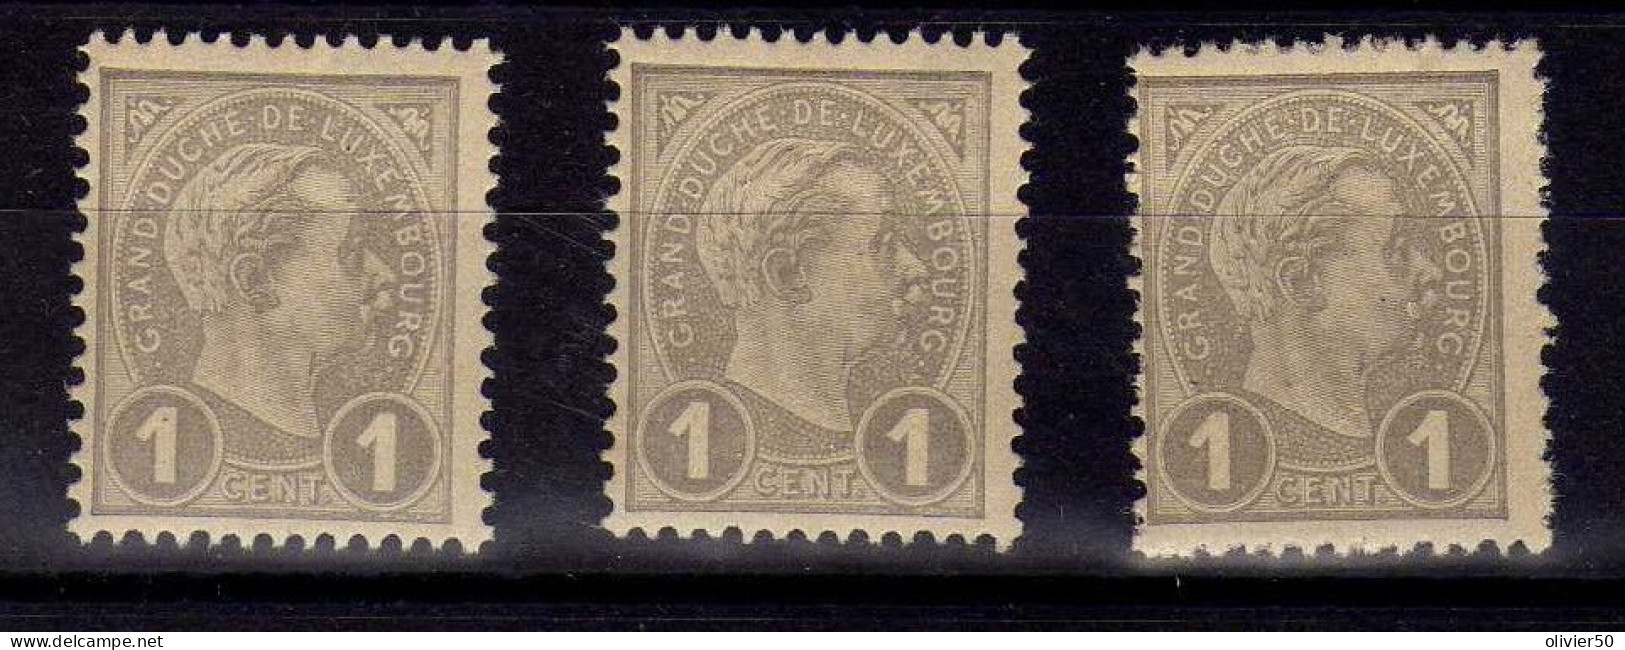 Luxembourg (1895) - 1 C. Grand-Duc Adolphe Neufs** - MNH - 1895 Adolphe Profil